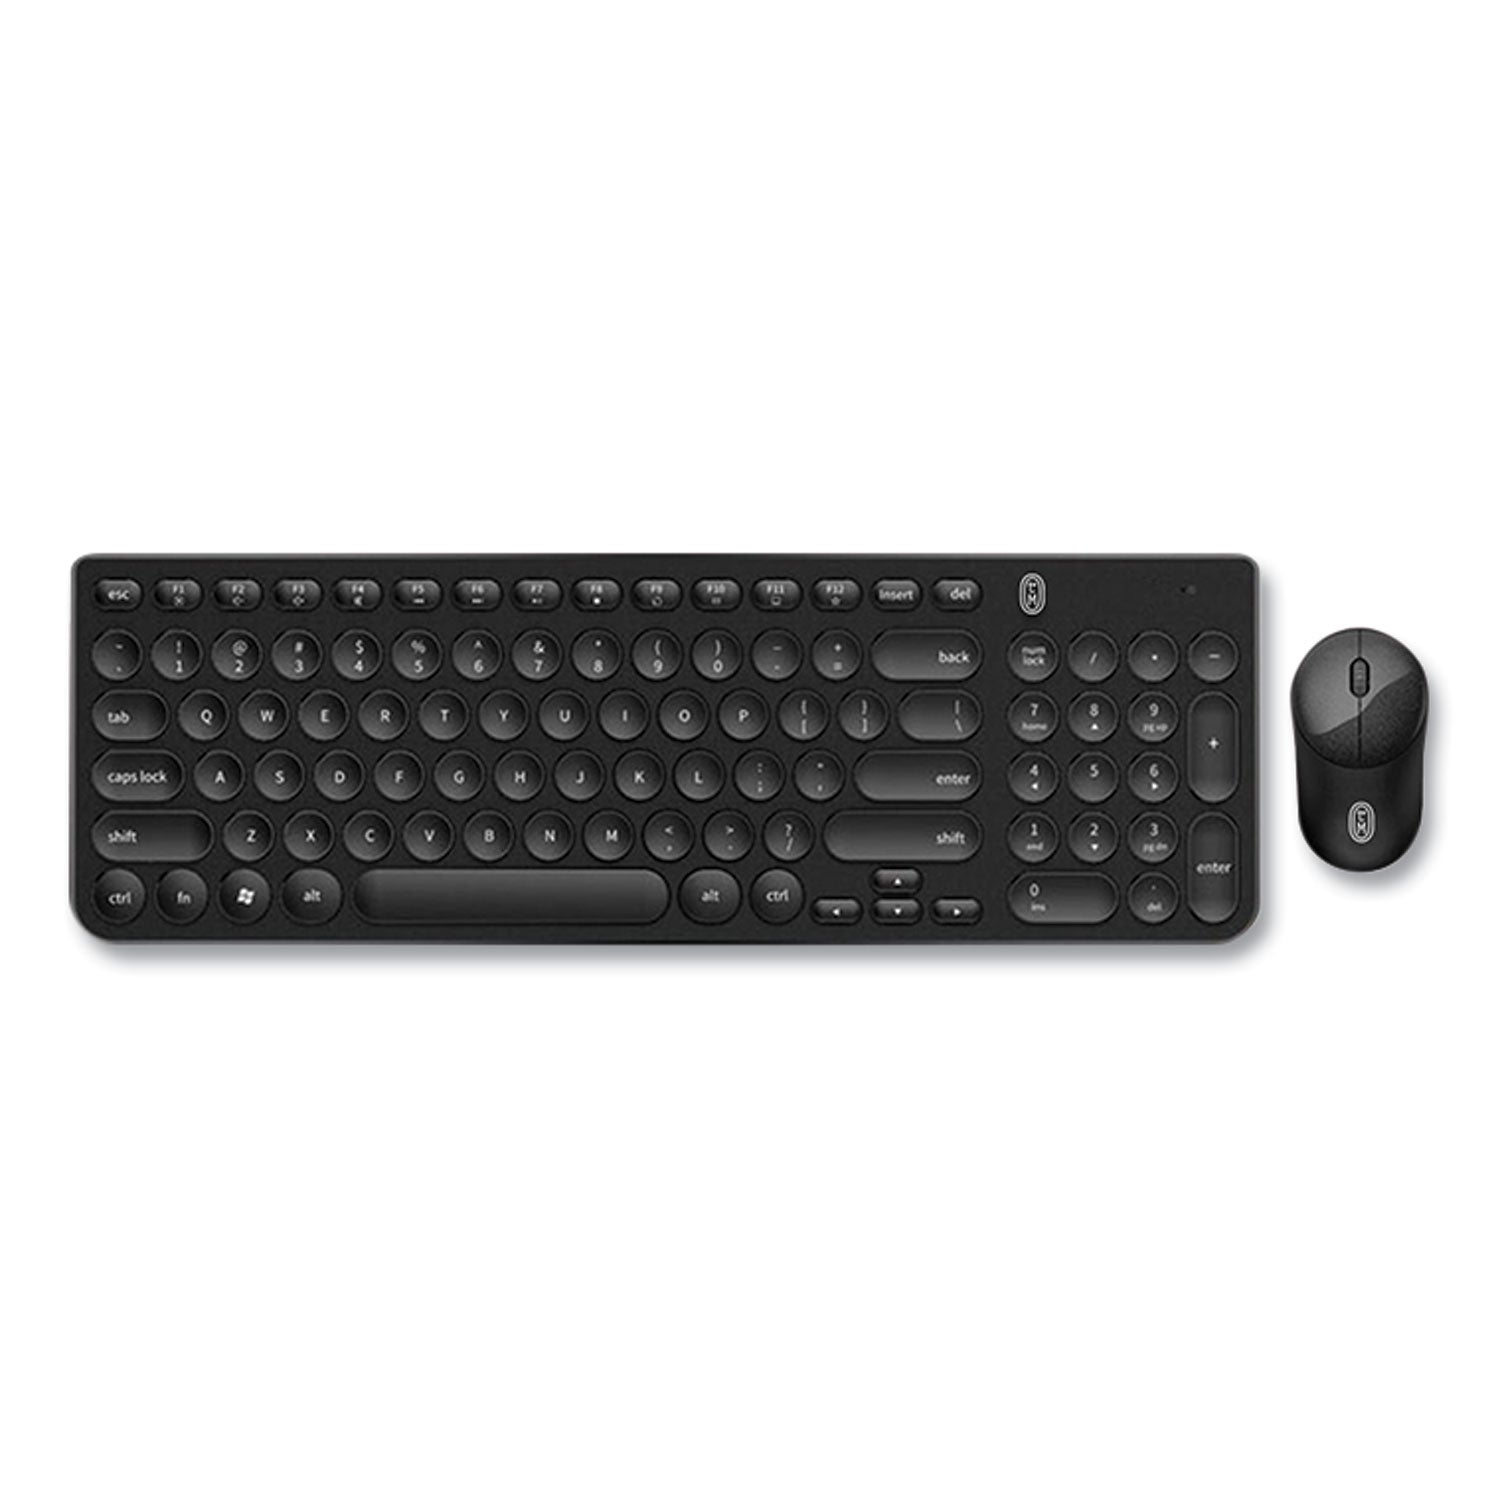 pro-wireless-keyboard-&-optical-mouse-combo-24-ghz-frequency-black_celrobb3wbk - 1